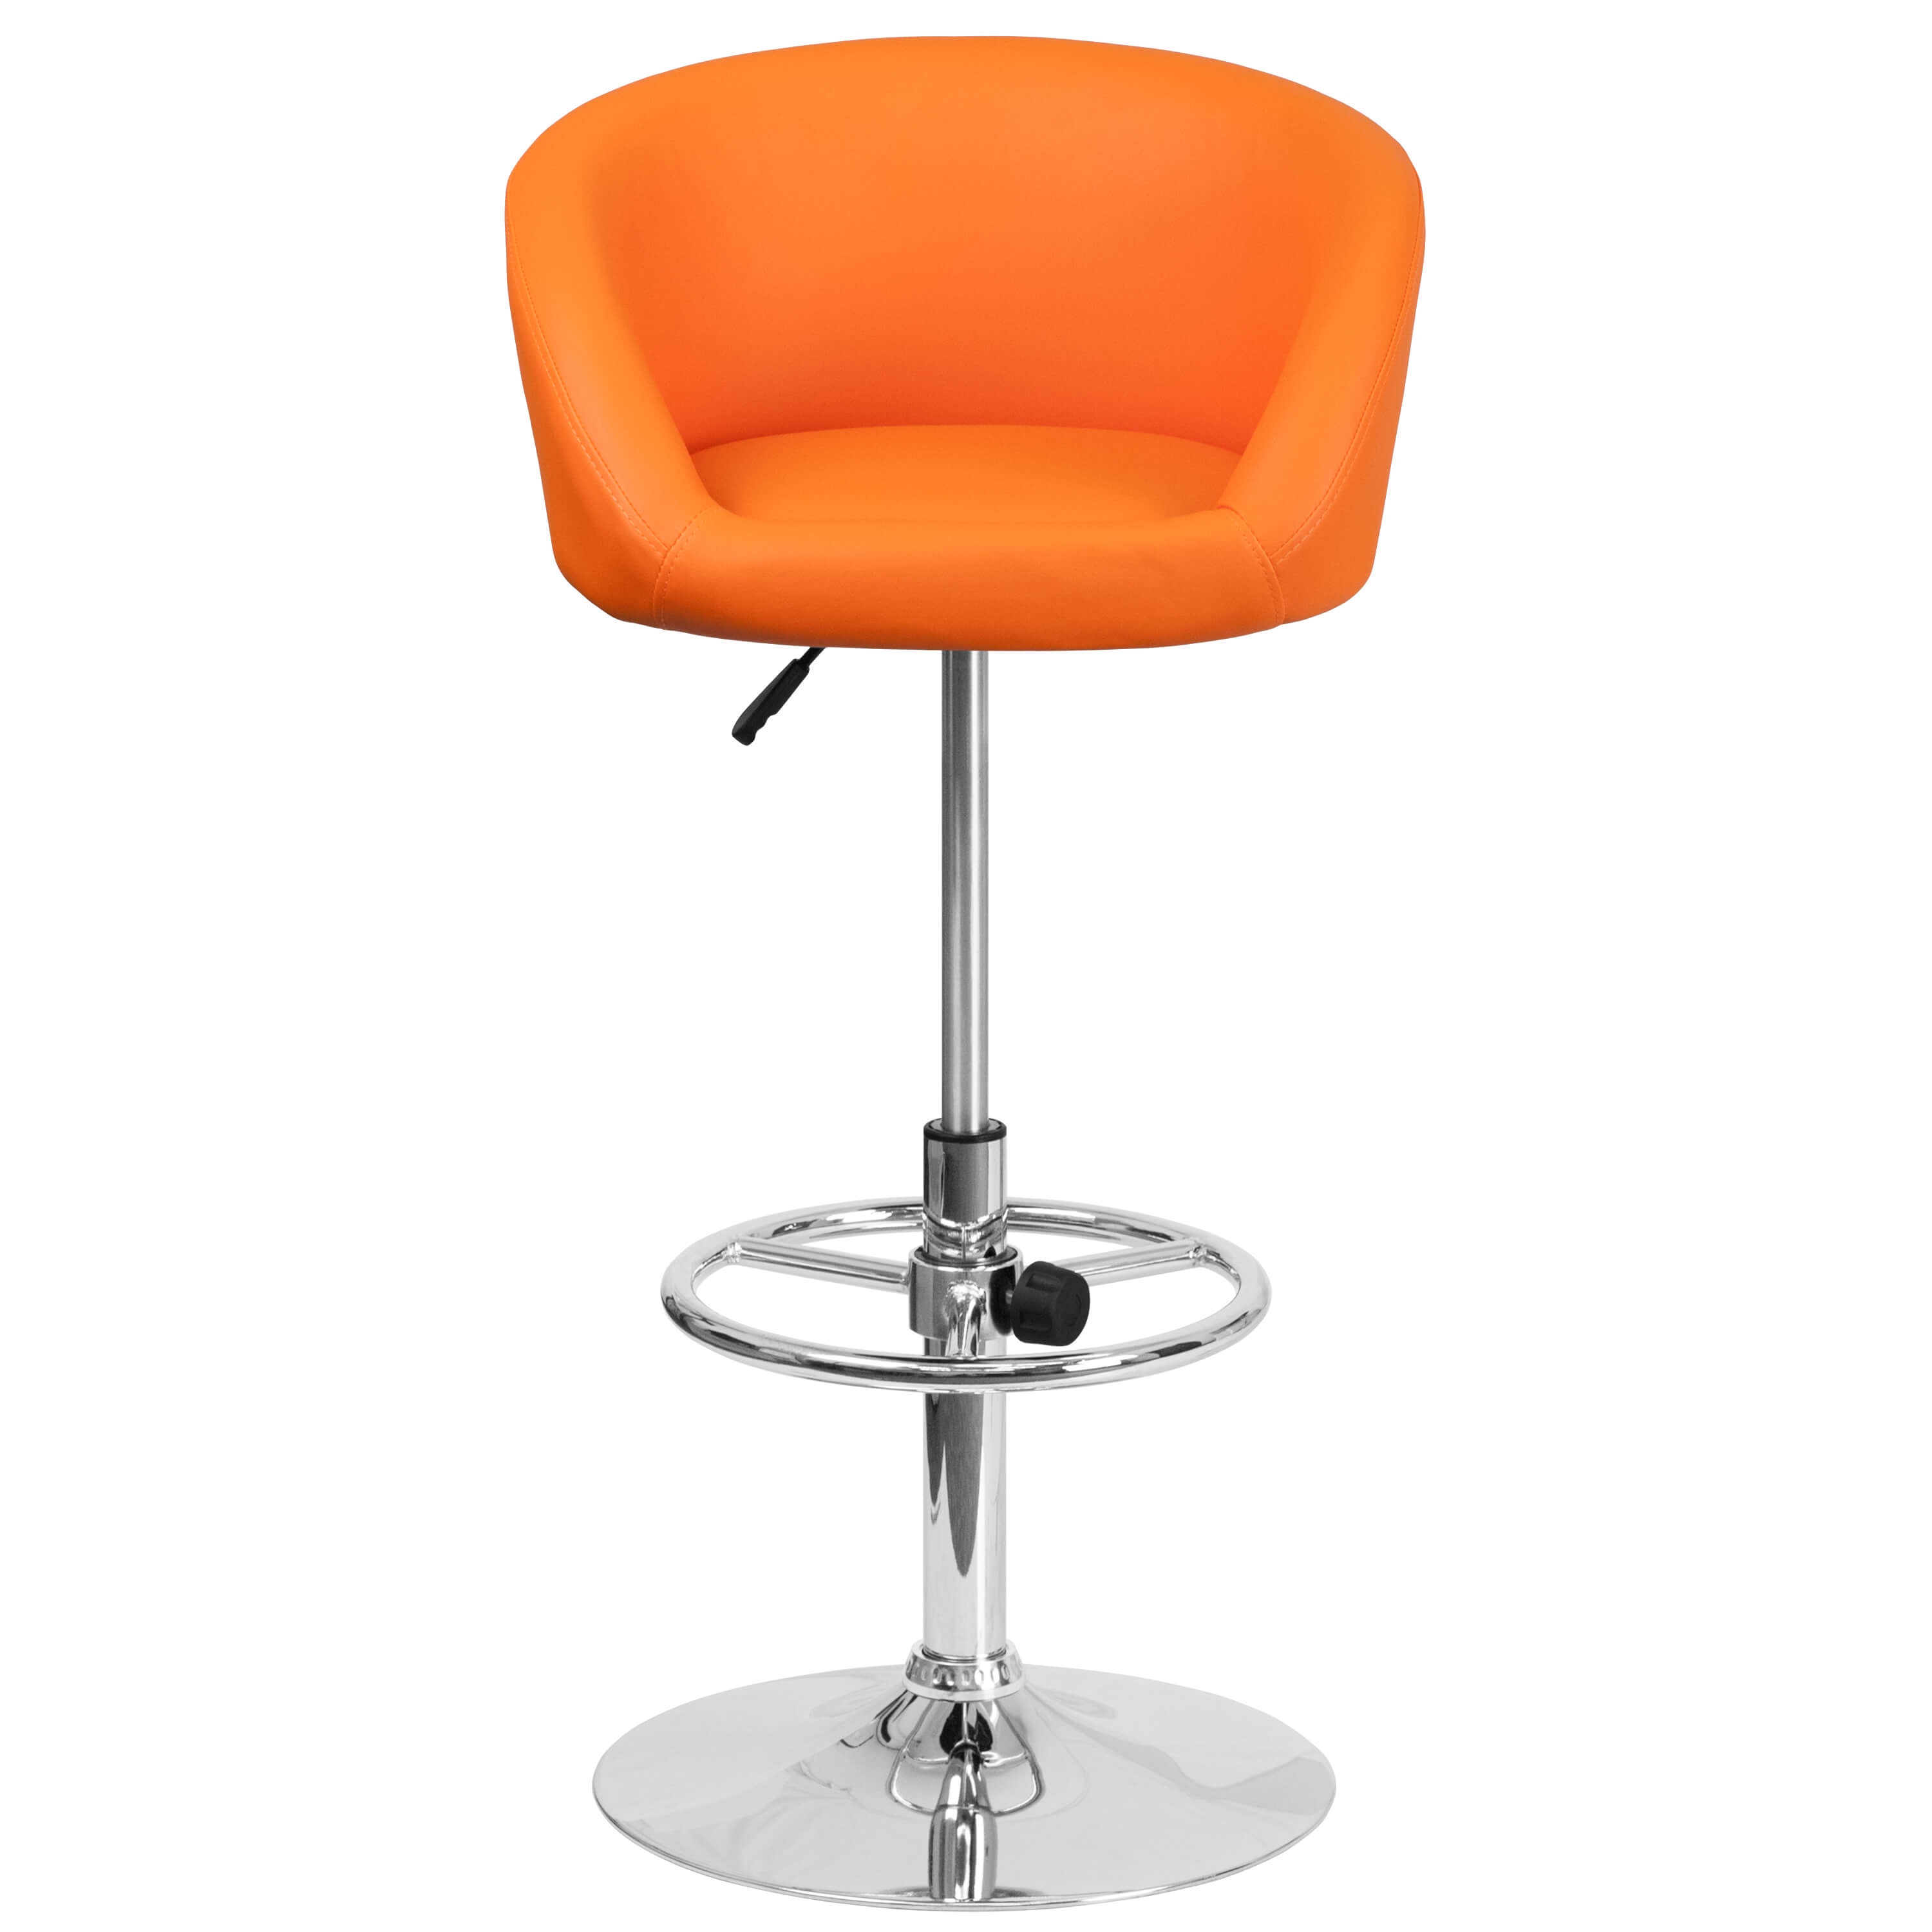 Adjustable colorful bar stools front view